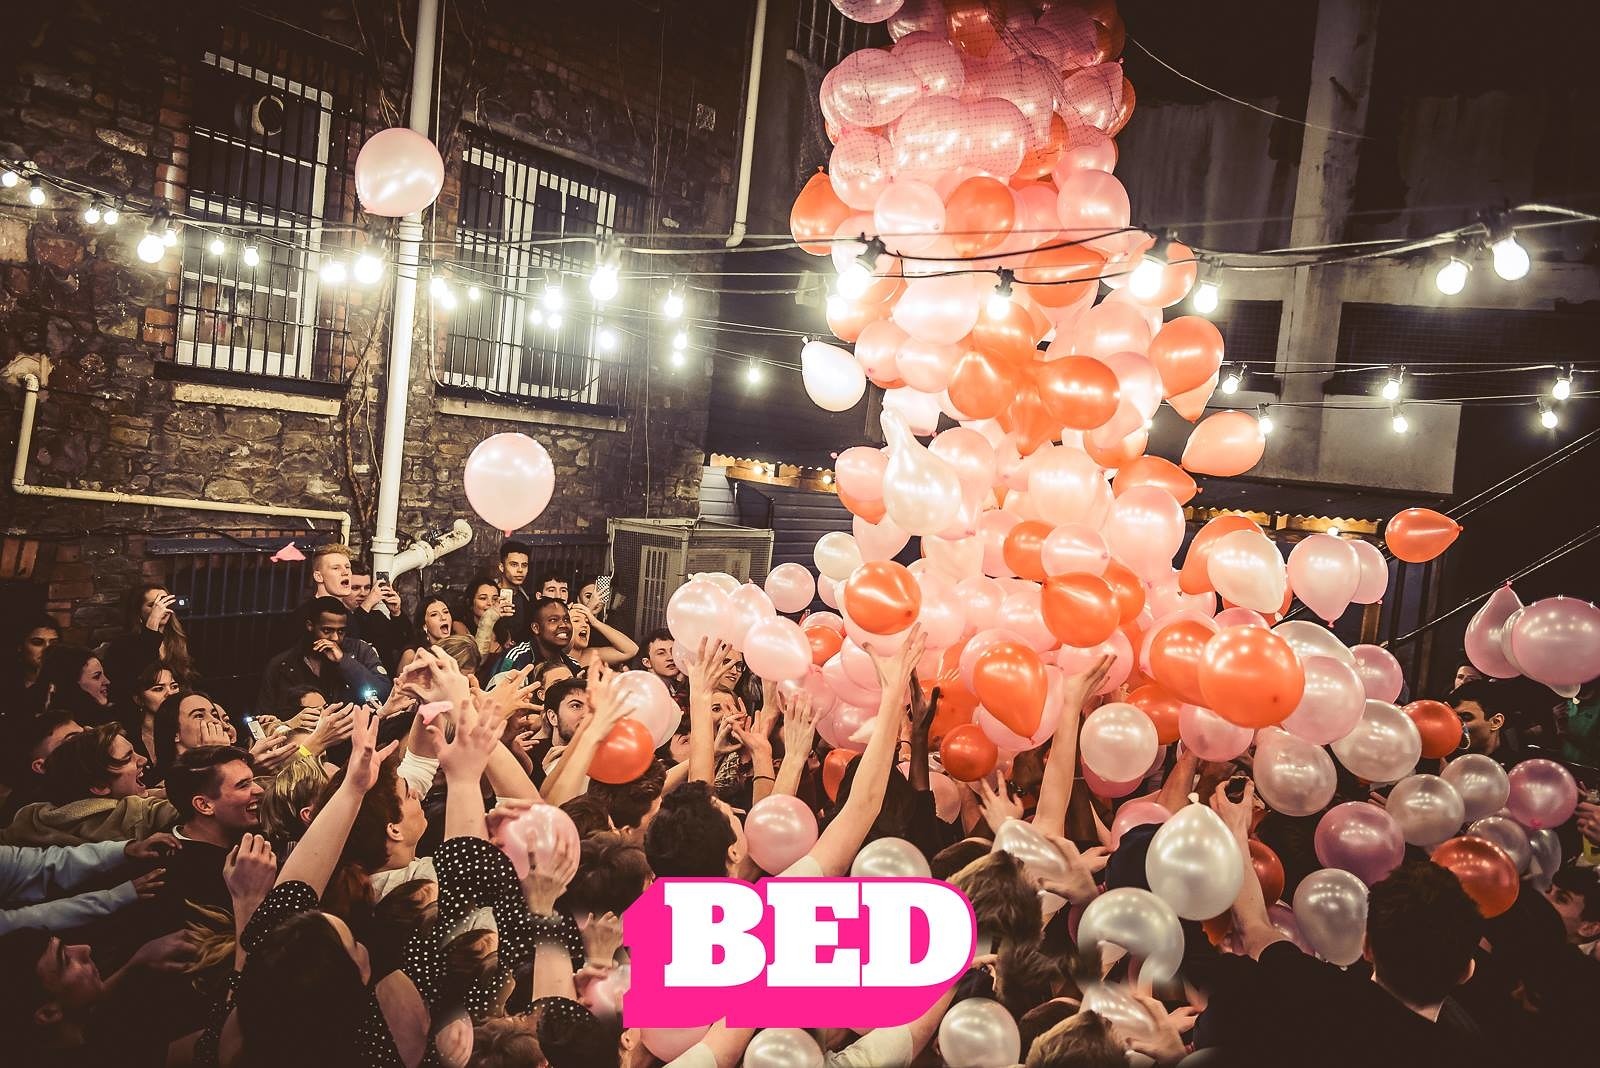 BED Monday's: GRAND REOPENING PARTY at Gravity